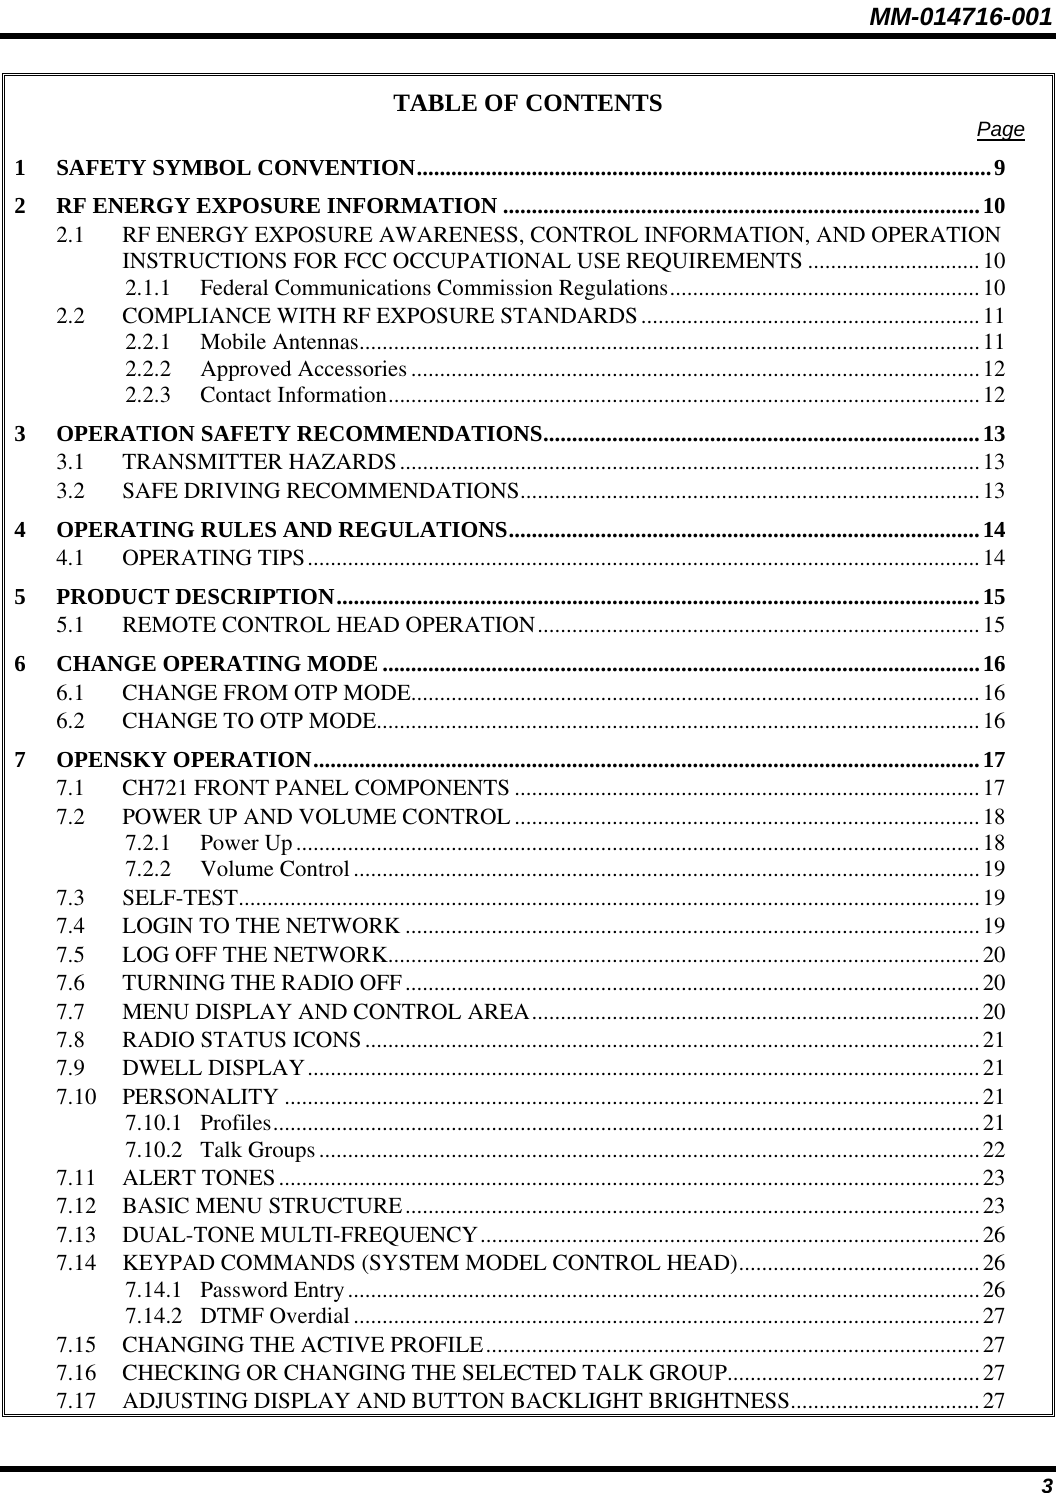 MM-014716-001 3 TABLE OF CONTENTS  Page 1 SAFETY SYMBOL CONVENTION....................................................................................................9 2 RF ENERGY EXPOSURE INFORMATION ...................................................................................10 2.1 RF ENERGY EXPOSURE AWARENESS, CONTROL INFORMATION, AND OPERATION INSTRUCTIONS FOR FCC OCCUPATIONAL USE REQUIREMENTS ..............................10 2.1.1 Federal Communications Commission Regulations......................................................10 2.2 COMPLIANCE WITH RF EXPOSURE STANDARDS...........................................................11 2.2.1 Mobile Antennas............................................................................................................11 2.2.2 Approved Accessories ...................................................................................................12 2.2.3 Contact Information.......................................................................................................12 3 OPERATION SAFETY RECOMMENDATIONS............................................................................13 3.1 TRANSMITTER HAZARDS.....................................................................................................13 3.2 SAFE DRIVING RECOMMENDATIONS................................................................................13 4 OPERATING RULES AND REGULATIONS..................................................................................14 4.1 OPERATING TIPS.....................................................................................................................14 5 PRODUCT DESCRIPTION................................................................................................................15 5.1 REMOTE CONTROL HEAD OPERATION.............................................................................15 6 CHANGE OPERATING MODE ........................................................................................................16 6.1 CHANGE FROM OTP MODE...................................................................................................16 6.2 CHANGE TO OTP MODE.........................................................................................................16 7 OPENSKY OPERATION....................................................................................................................17 7.1 CH721 FRONT PANEL COMPONENTS .................................................................................17 7.2 POWER UP AND VOLUME CONTROL .................................................................................18 7.2.1 Power Up.......................................................................................................................18 7.2.2 Volume Control.............................................................................................................19 7.3 SELF-TEST.................................................................................................................................19 7.4 LOGIN TO THE NETWORK ....................................................................................................19 7.5 LOG OFF THE NETWORK.......................................................................................................20 7.6 TURNING THE RADIO OFF....................................................................................................20 7.7 MENU DISPLAY AND CONTROL AREA..............................................................................20 7.8 RADIO STATUS ICONS...........................................................................................................21 7.9 DWELL DISPLAY.....................................................................................................................21 7.10 PERSONALITY .........................................................................................................................21 7.10.1 Profiles...........................................................................................................................21 7.10.2 Talk Groups...................................................................................................................22 7.11 ALERT TONES..........................................................................................................................23 7.12 BASIC MENU STRUCTURE....................................................................................................23 7.13 DUAL-TONE MULTI-FREQUENCY.......................................................................................26 7.14 KEYPAD COMMANDS (SYSTEM MODEL CONTROL HEAD)..........................................26 7.14.1 Password Entry..............................................................................................................26 7.14.2 DTMF Overdial.............................................................................................................27 7.15 CHANGING THE ACTIVE PROFILE......................................................................................27 7.16 CHECKING OR CHANGING THE SELECTED TALK GROUP............................................27 7.17 ADJUSTING DISPLAY AND BUTTON BACKLIGHT BRIGHTNESS.................................27 